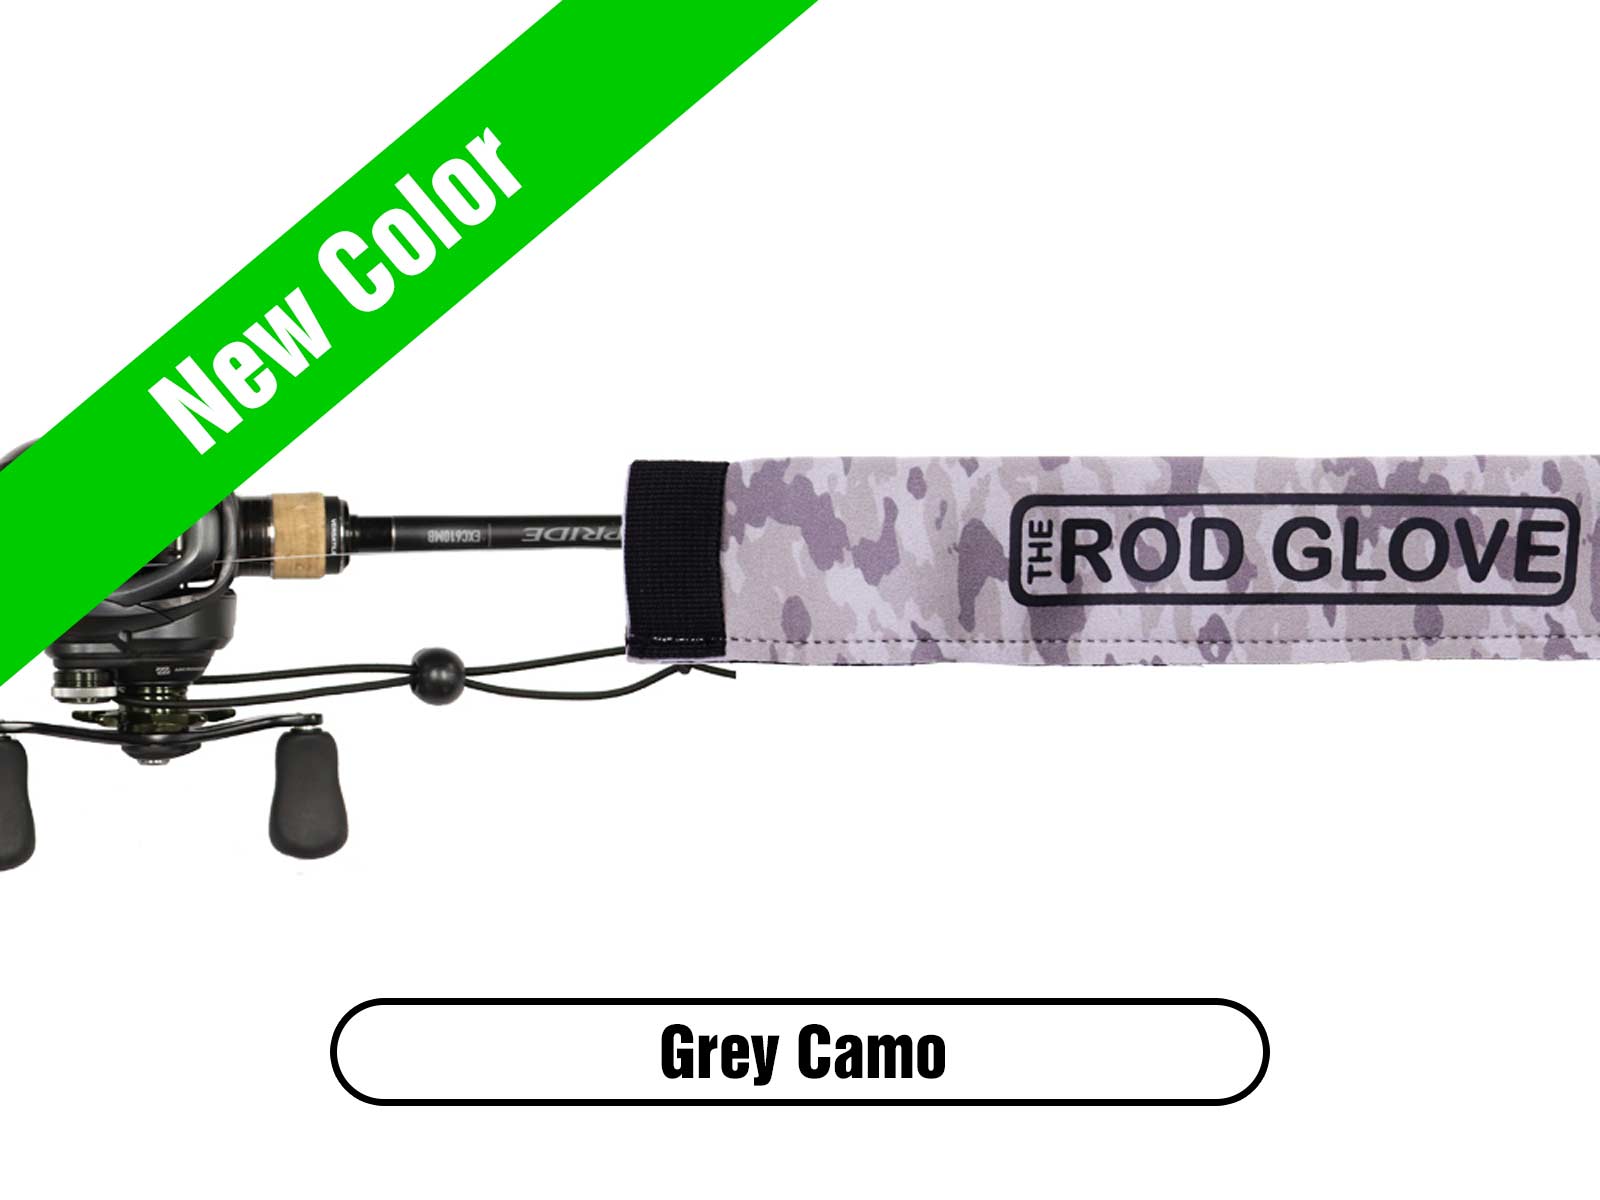 The Rod Glove @ Sportsmen's Direct: Targeting Outdoor Innovation